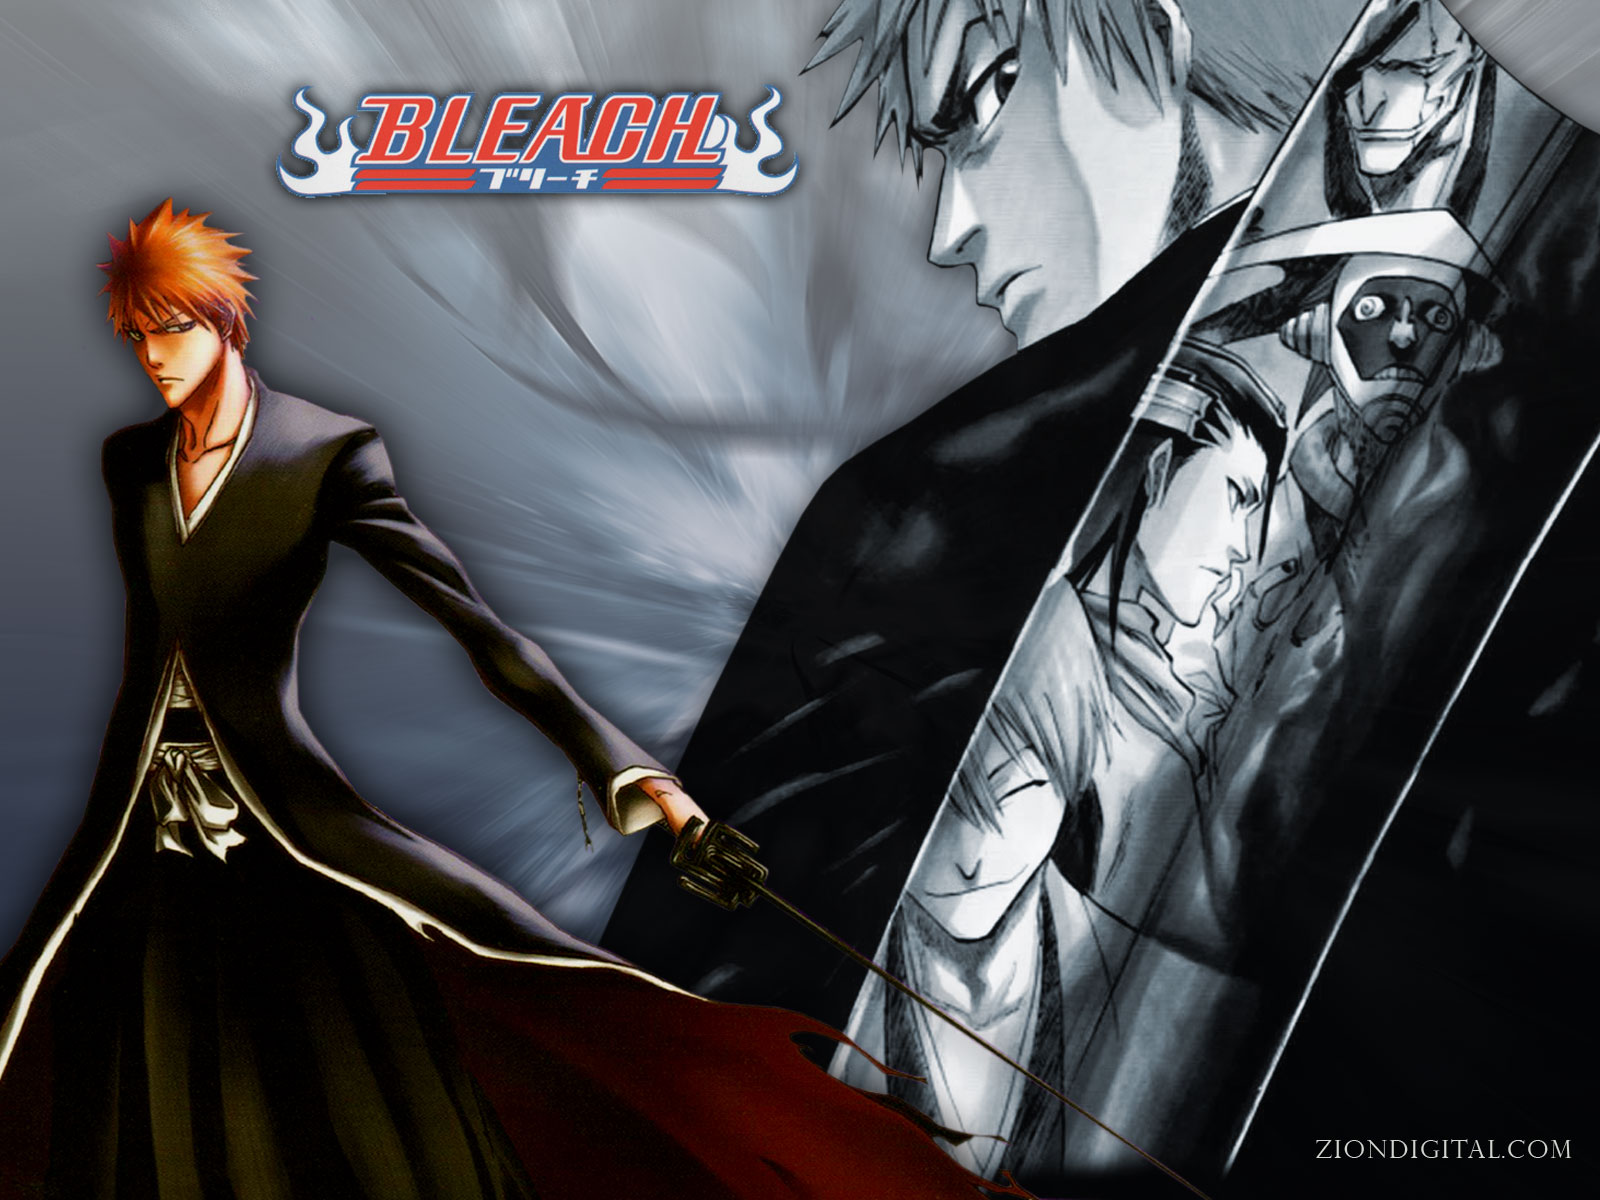 Bleach Anime Manga HD Wallpapers Images Pictures Gallery